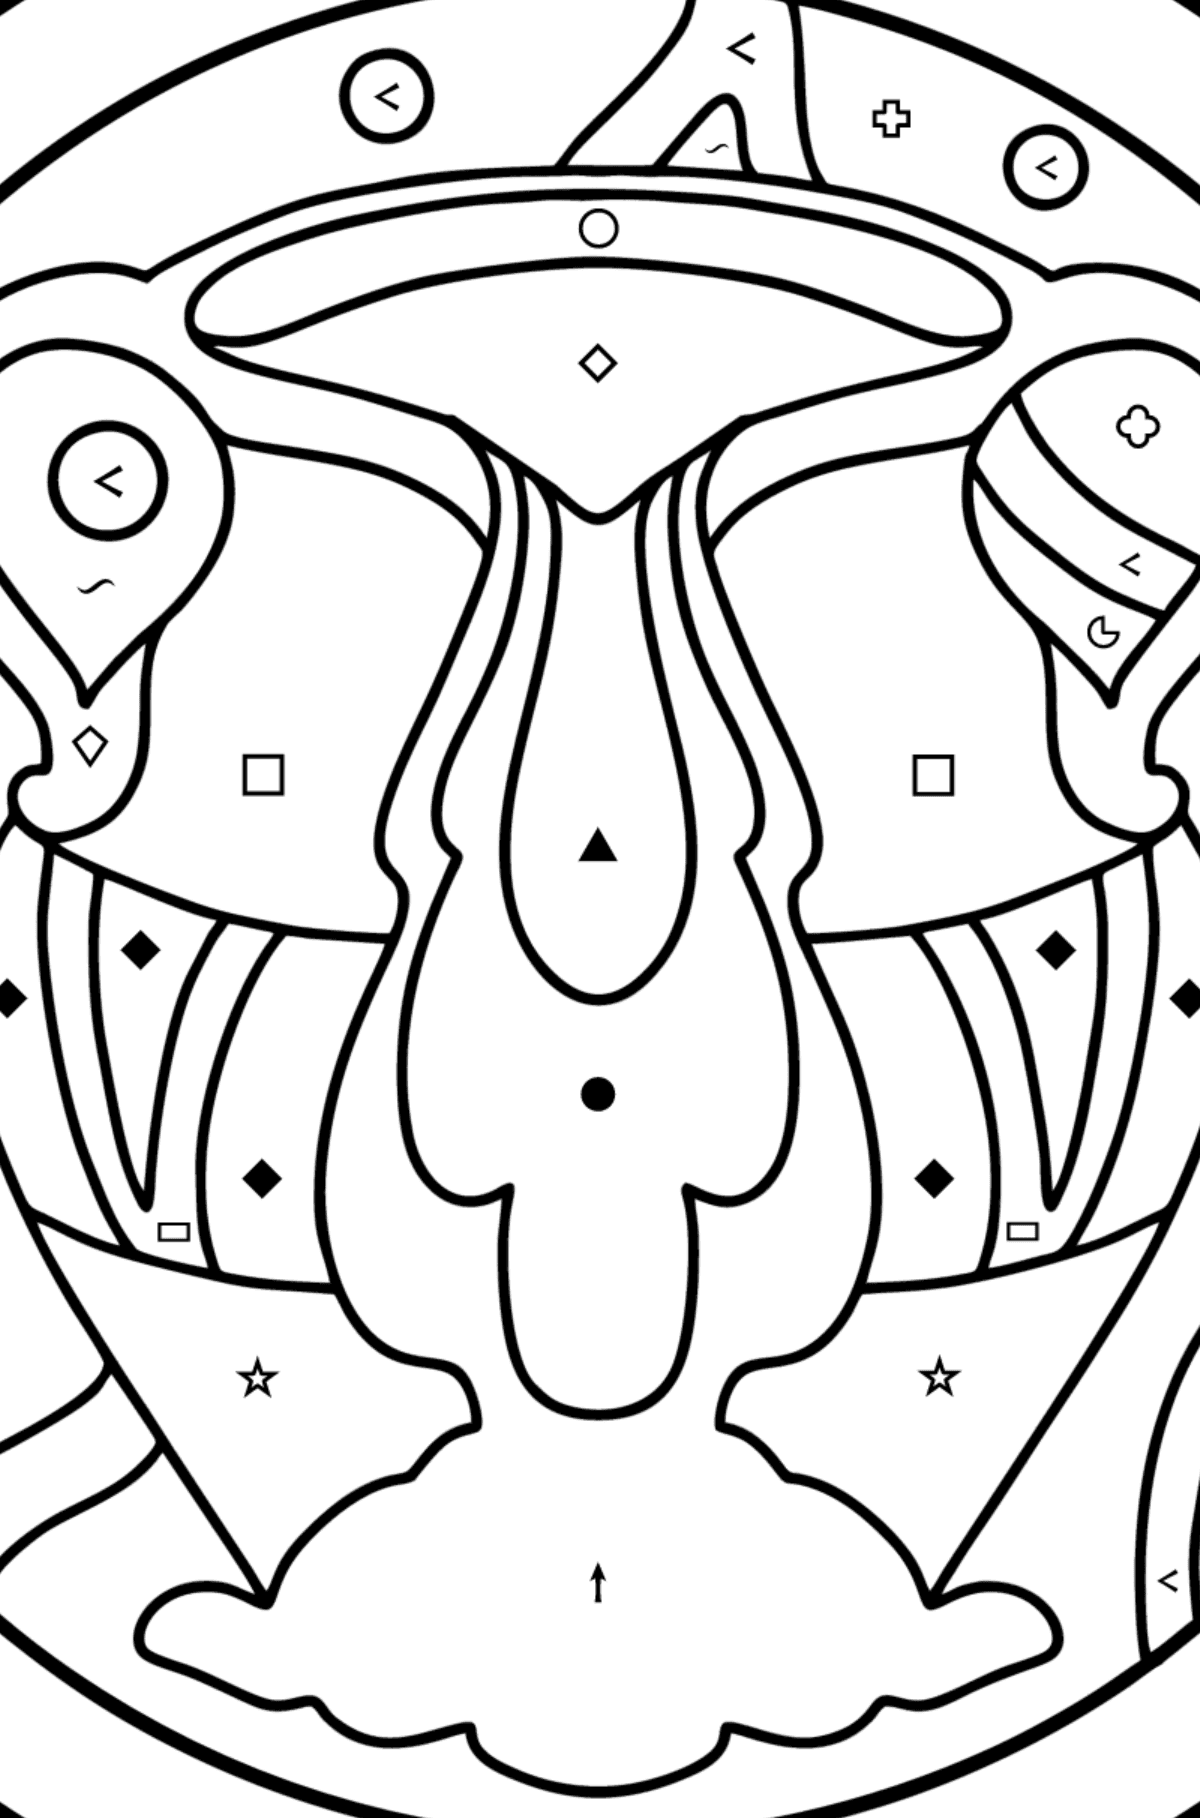 Coloring page for kids - zodiac sign Aquarius - Coloring by Symbols and Geometric Shapes for Kids